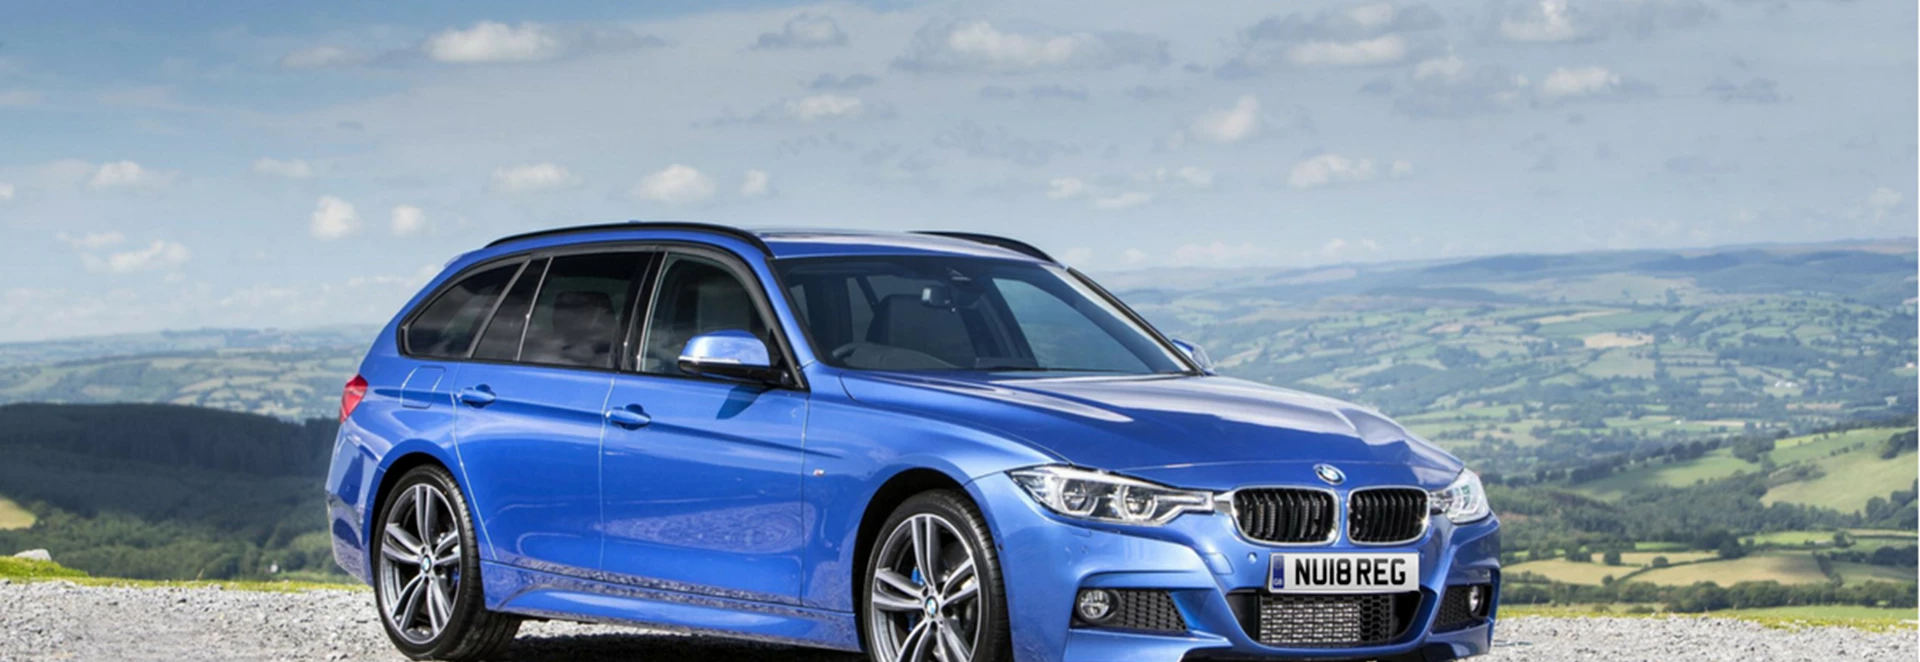 2018 BMW 3 Series Touring review